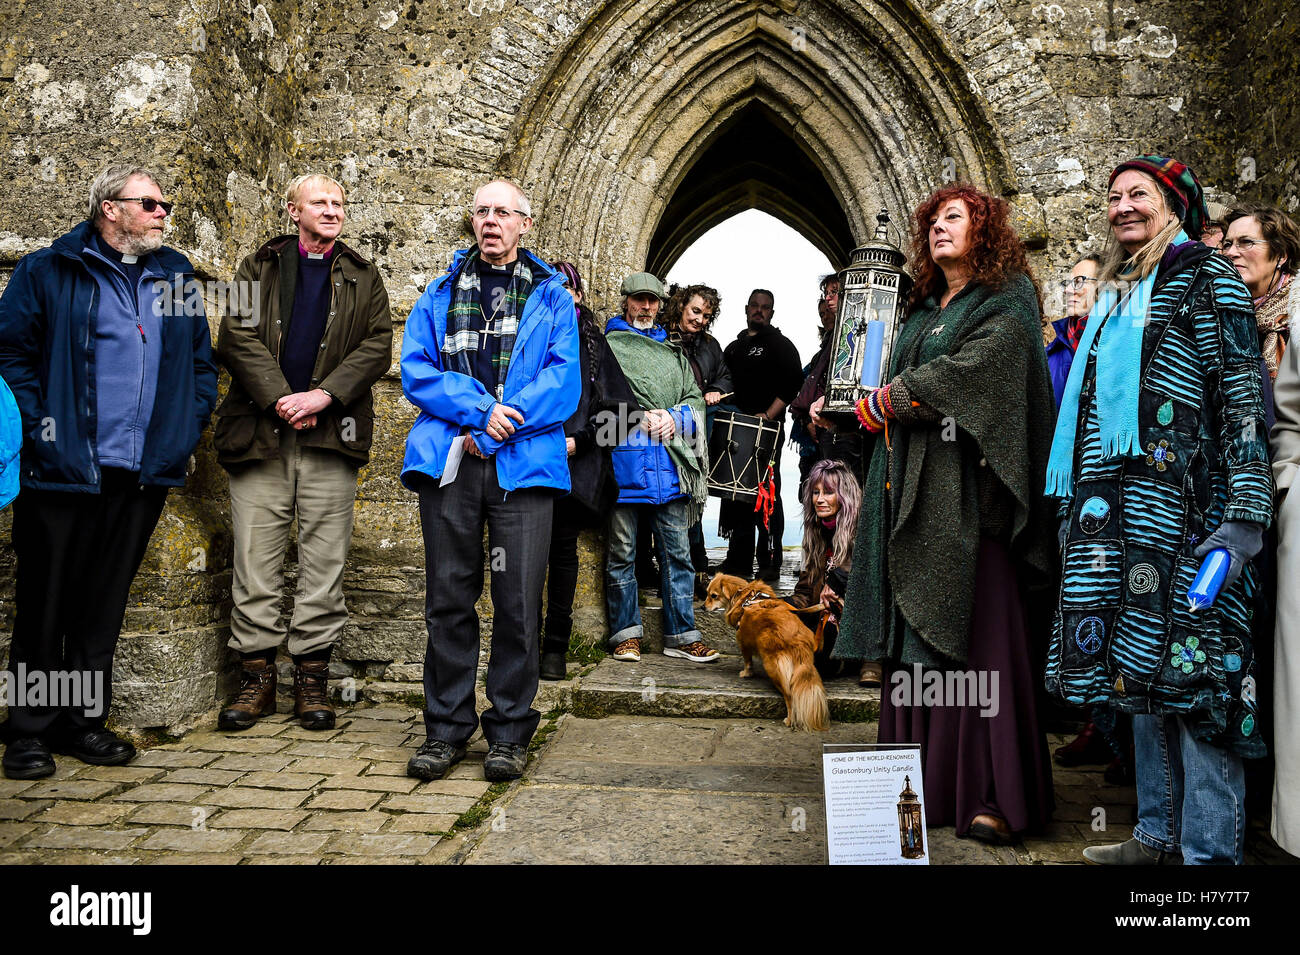 The Archbishop of Canterbury, the Most Rev Justin Welby leads prayers by St Michael's Tower atop Glastonbury Tor accompanied by local clergy, parishoners and people of other faith and spiritual groups during his visit to the Somerset area. Stock Photo